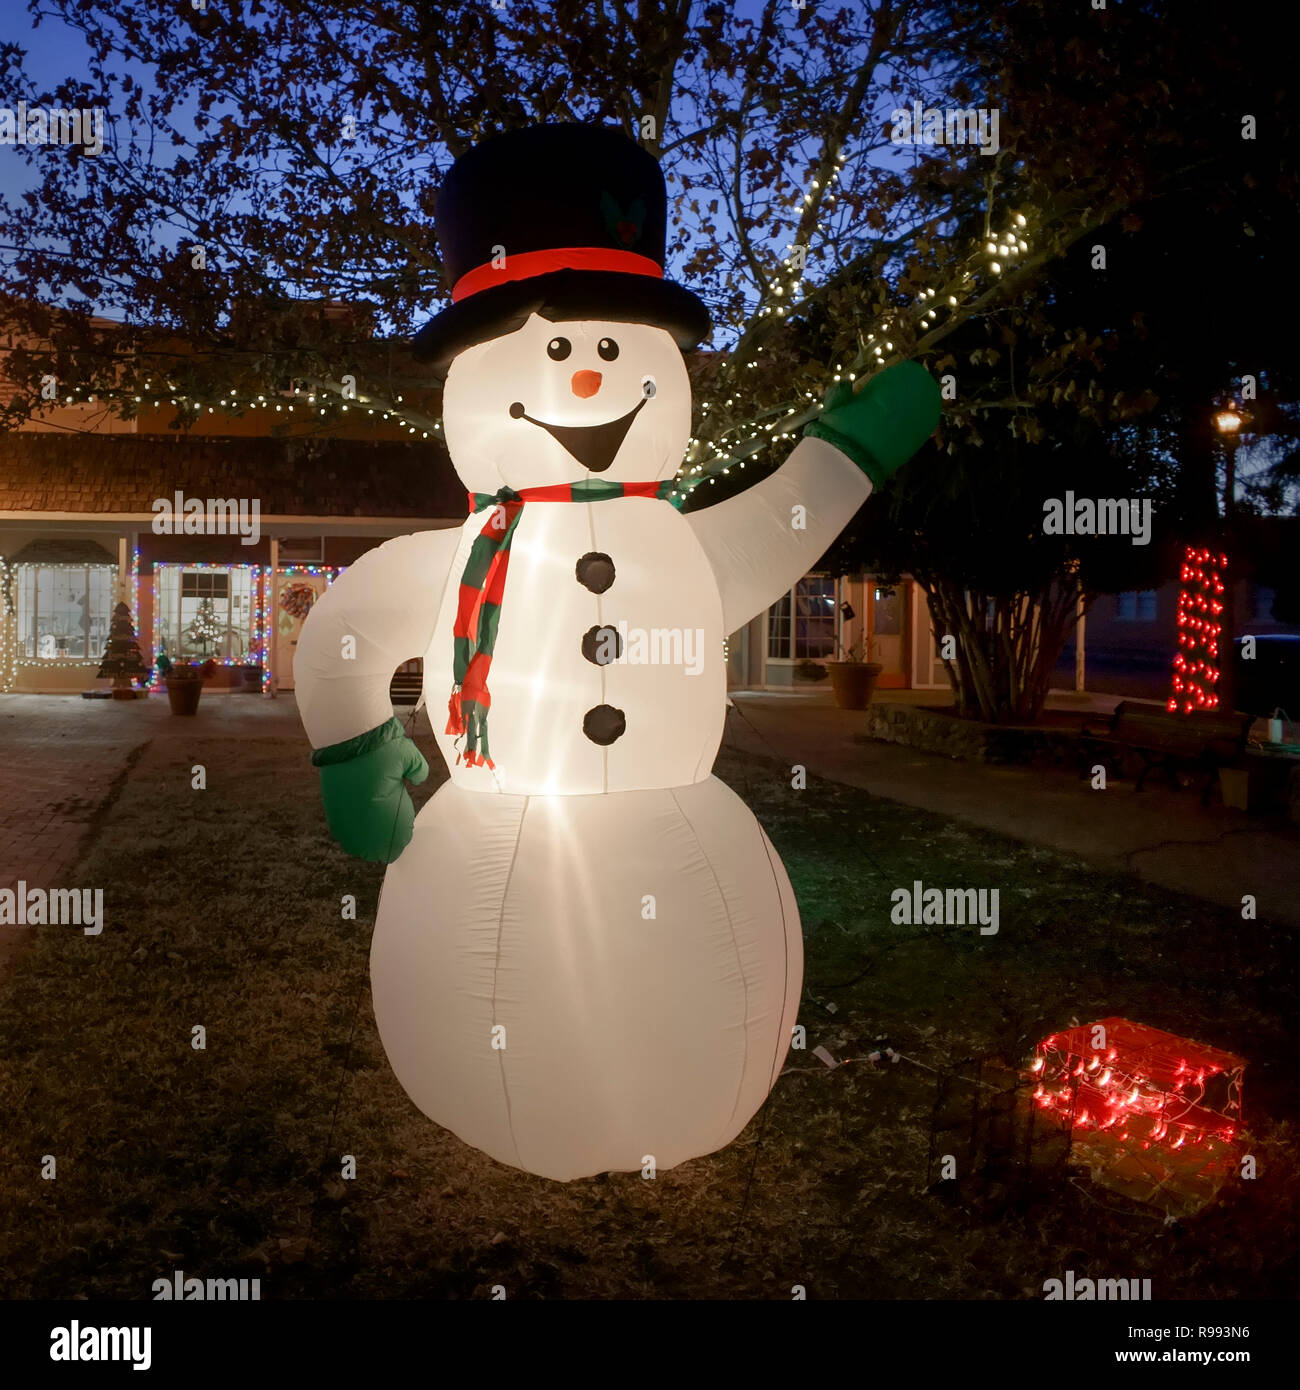 Inflatable snowman at Christmas time in Alpine, Texas Stock Photo